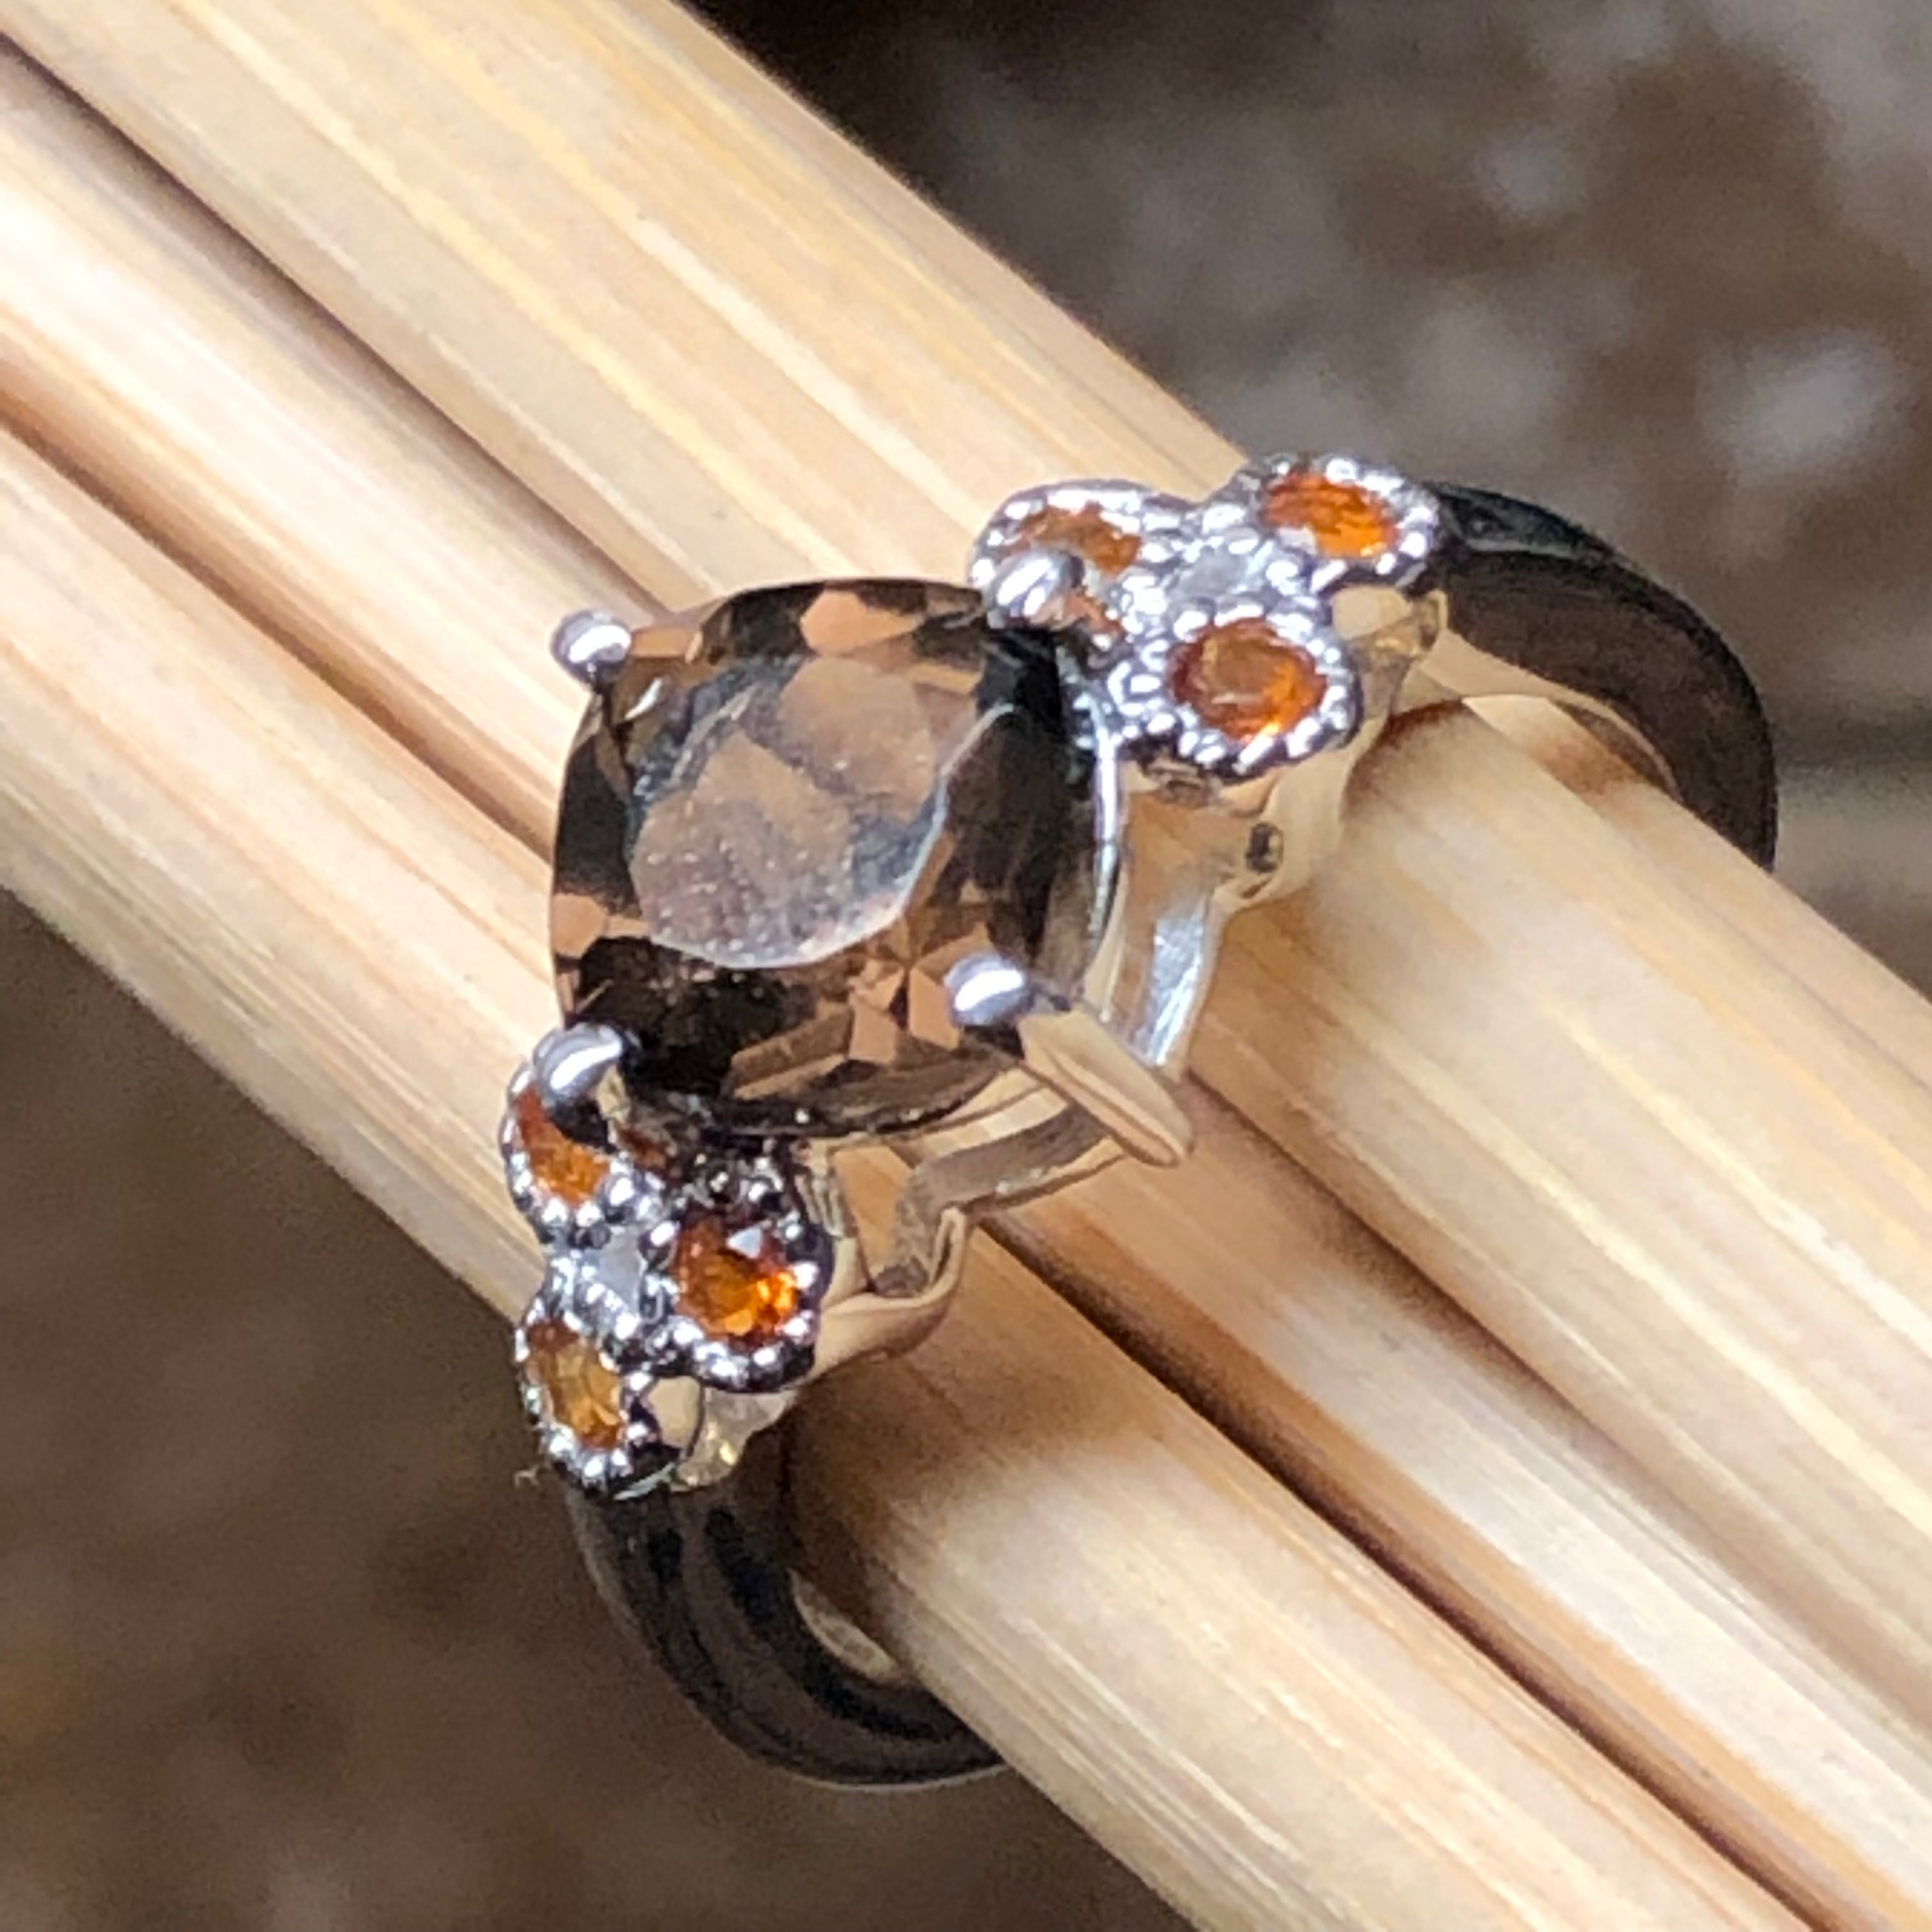 Genuine 1ct Smoky Topaz, Golden Citrine 925 Solid Sterling Silver Engagement Ring Size 6, 7, 8, 9 - Natural Rocks by Kala